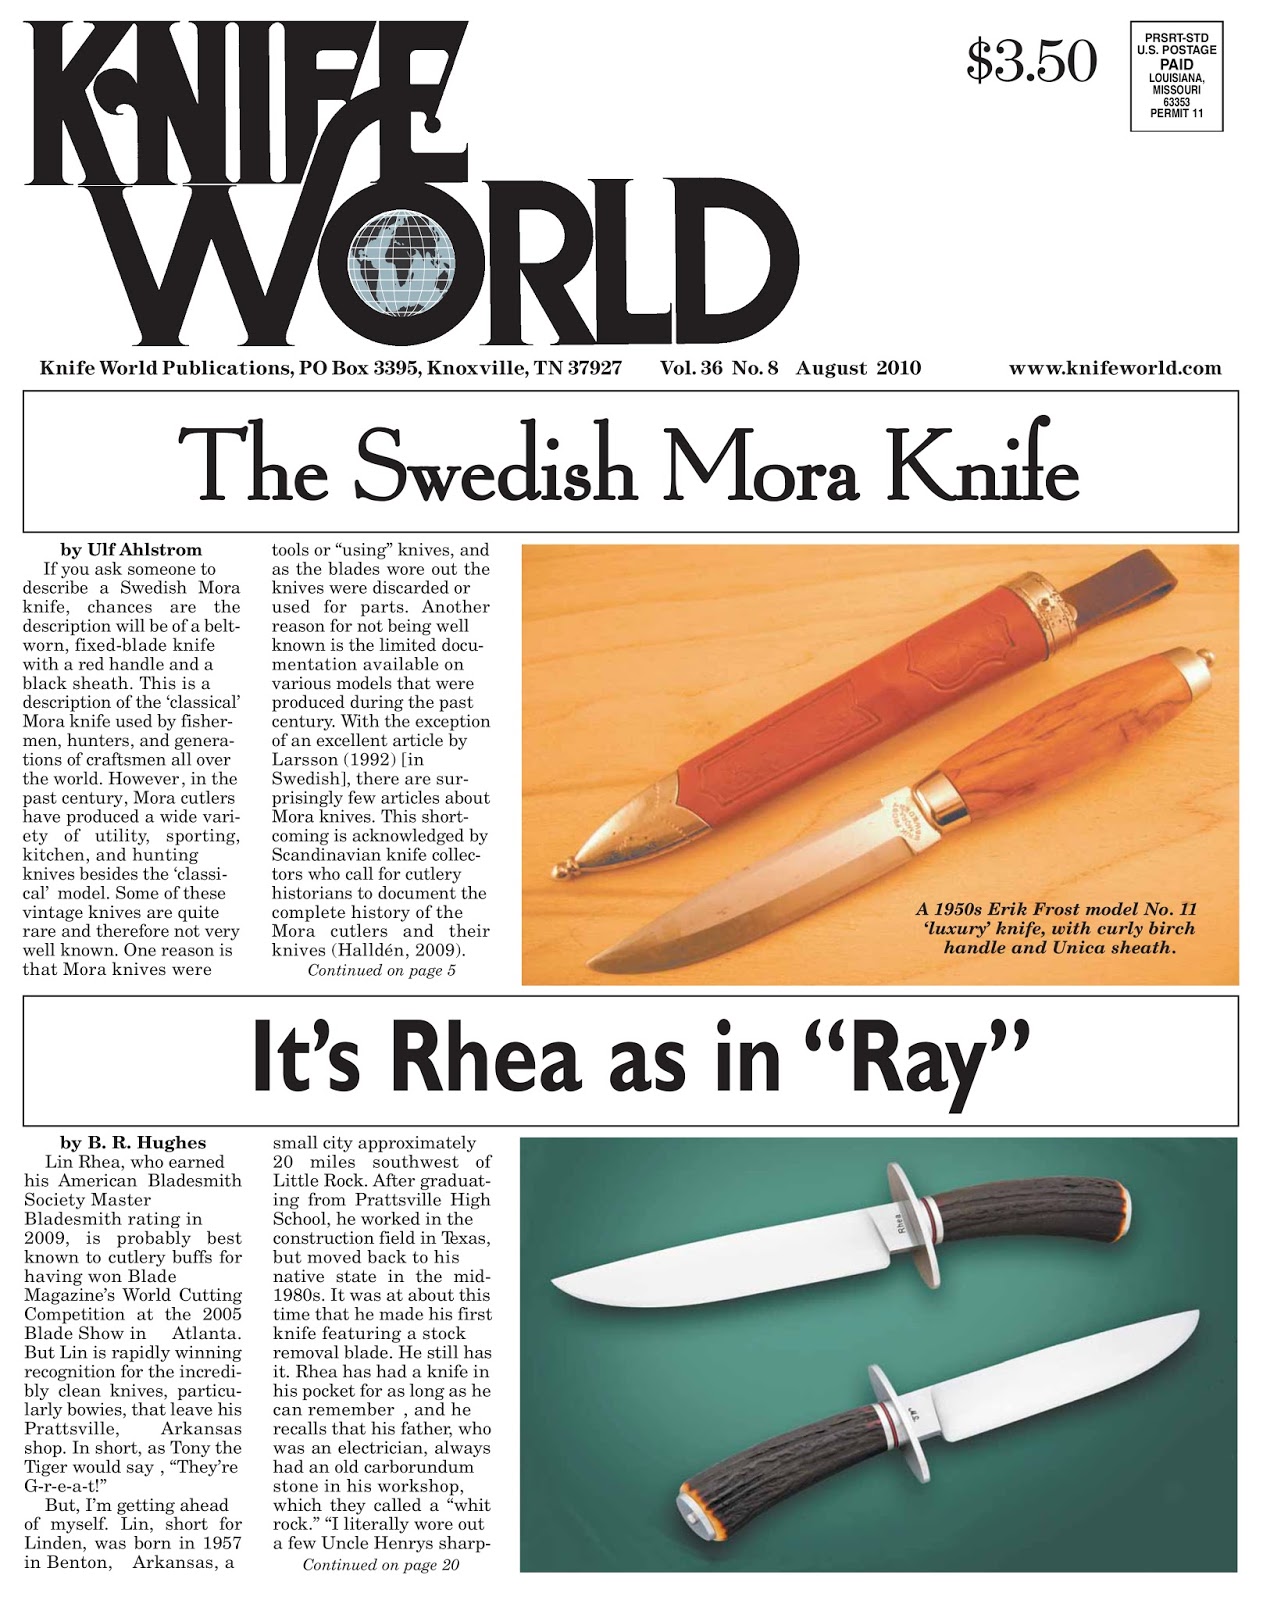 The Blade Blog: Famous cutlery from Sweden: The Mora knife